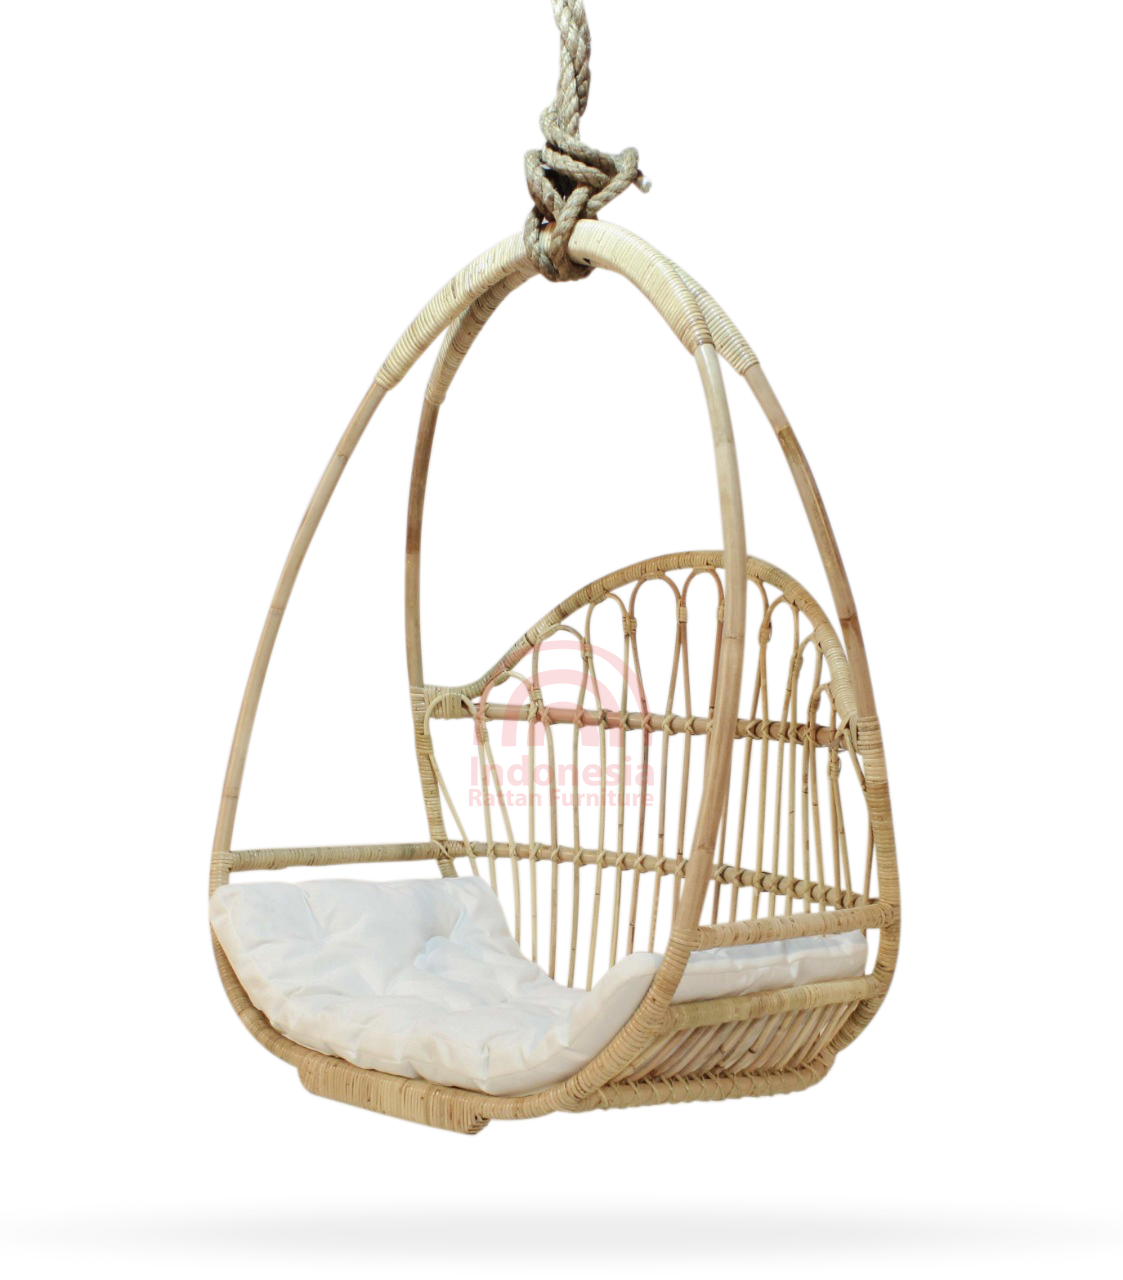 Tips for Choosing Rattan Hanging Chair